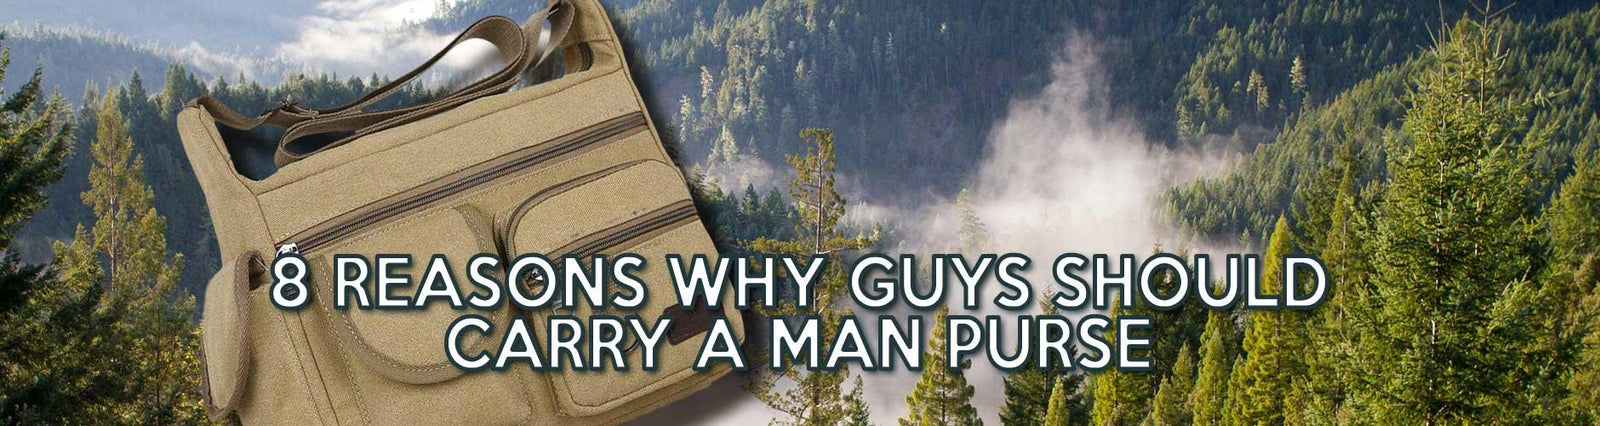 8 Reasons Why Guys Should Carry a Man Purse - Man Purse Co